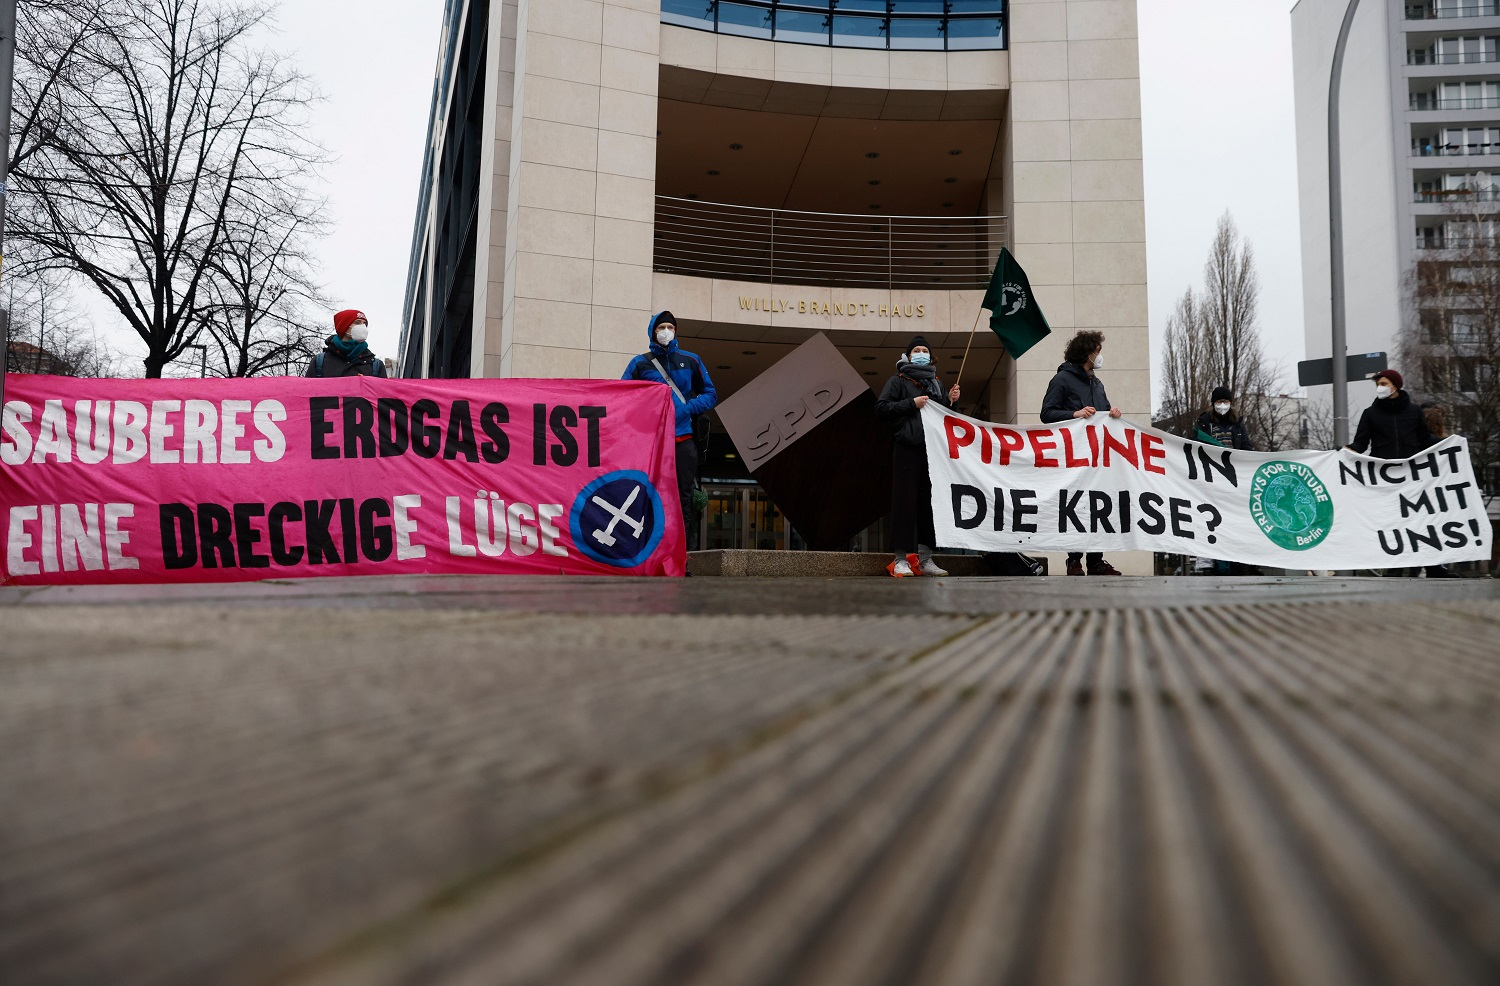 Activists of the "Fridays for Future" environmental and climate protection movement hold banners reading "Proper natural gas is a dirty lie" and "Pipeline into the crisis? Not with us!" as they demonstrate against the NordStream 2 gas pipeline and gas-related infrastructure on January 12, 2021 in front of the headquarters of the social democratic SPD party in Berlin.